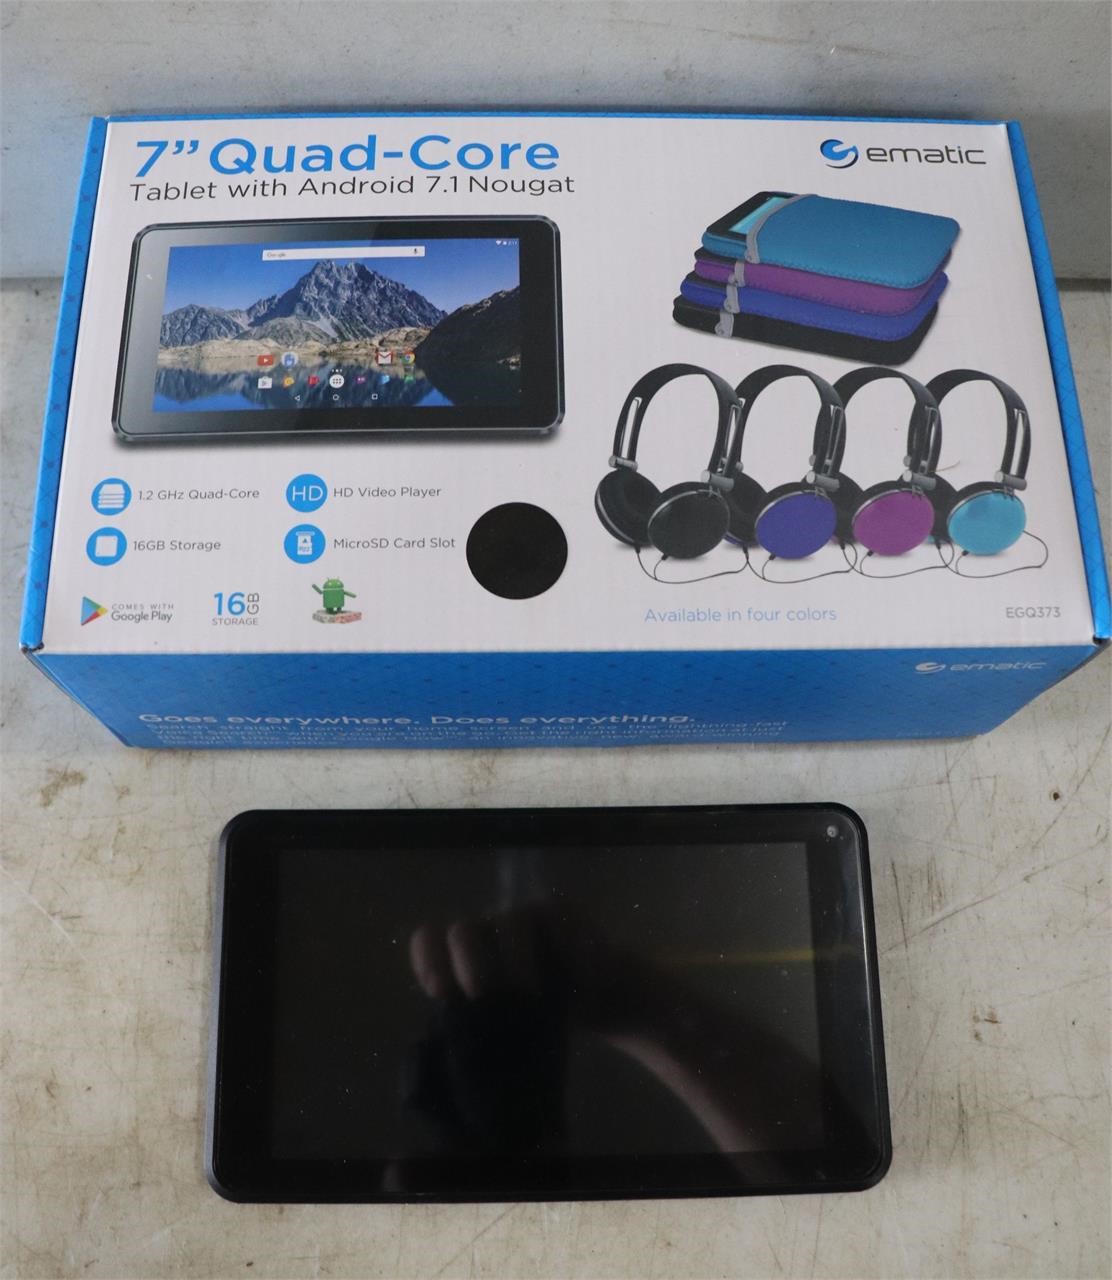 Ematic 7" Quad Core Tablet Only